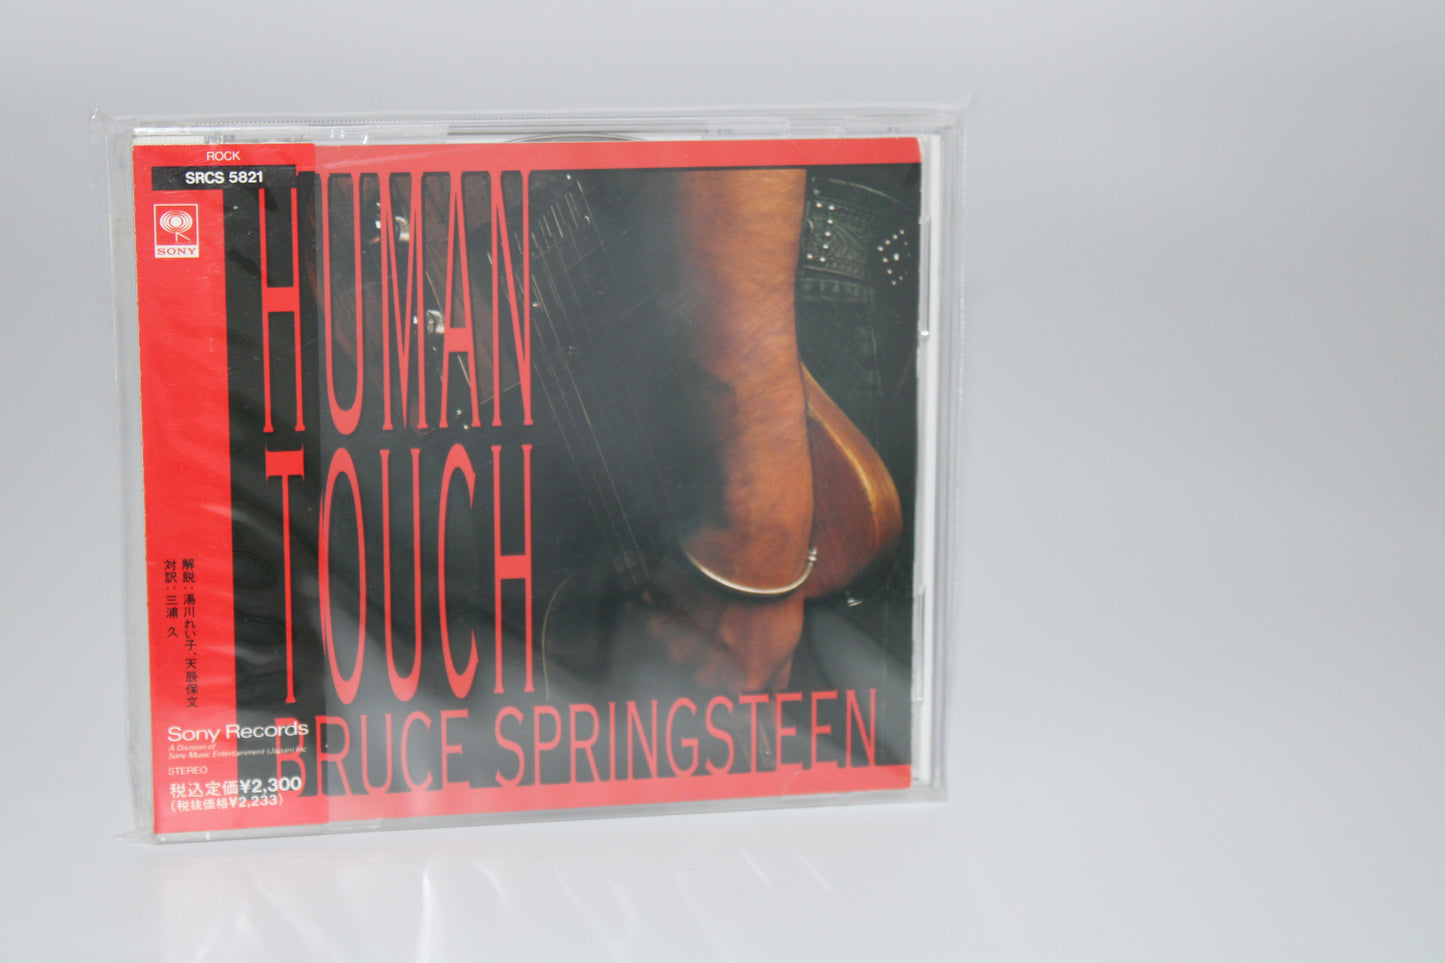 Bruce Springsteen Human Touch LP on CD/First Japan Release, Sealed with OBI Collectible